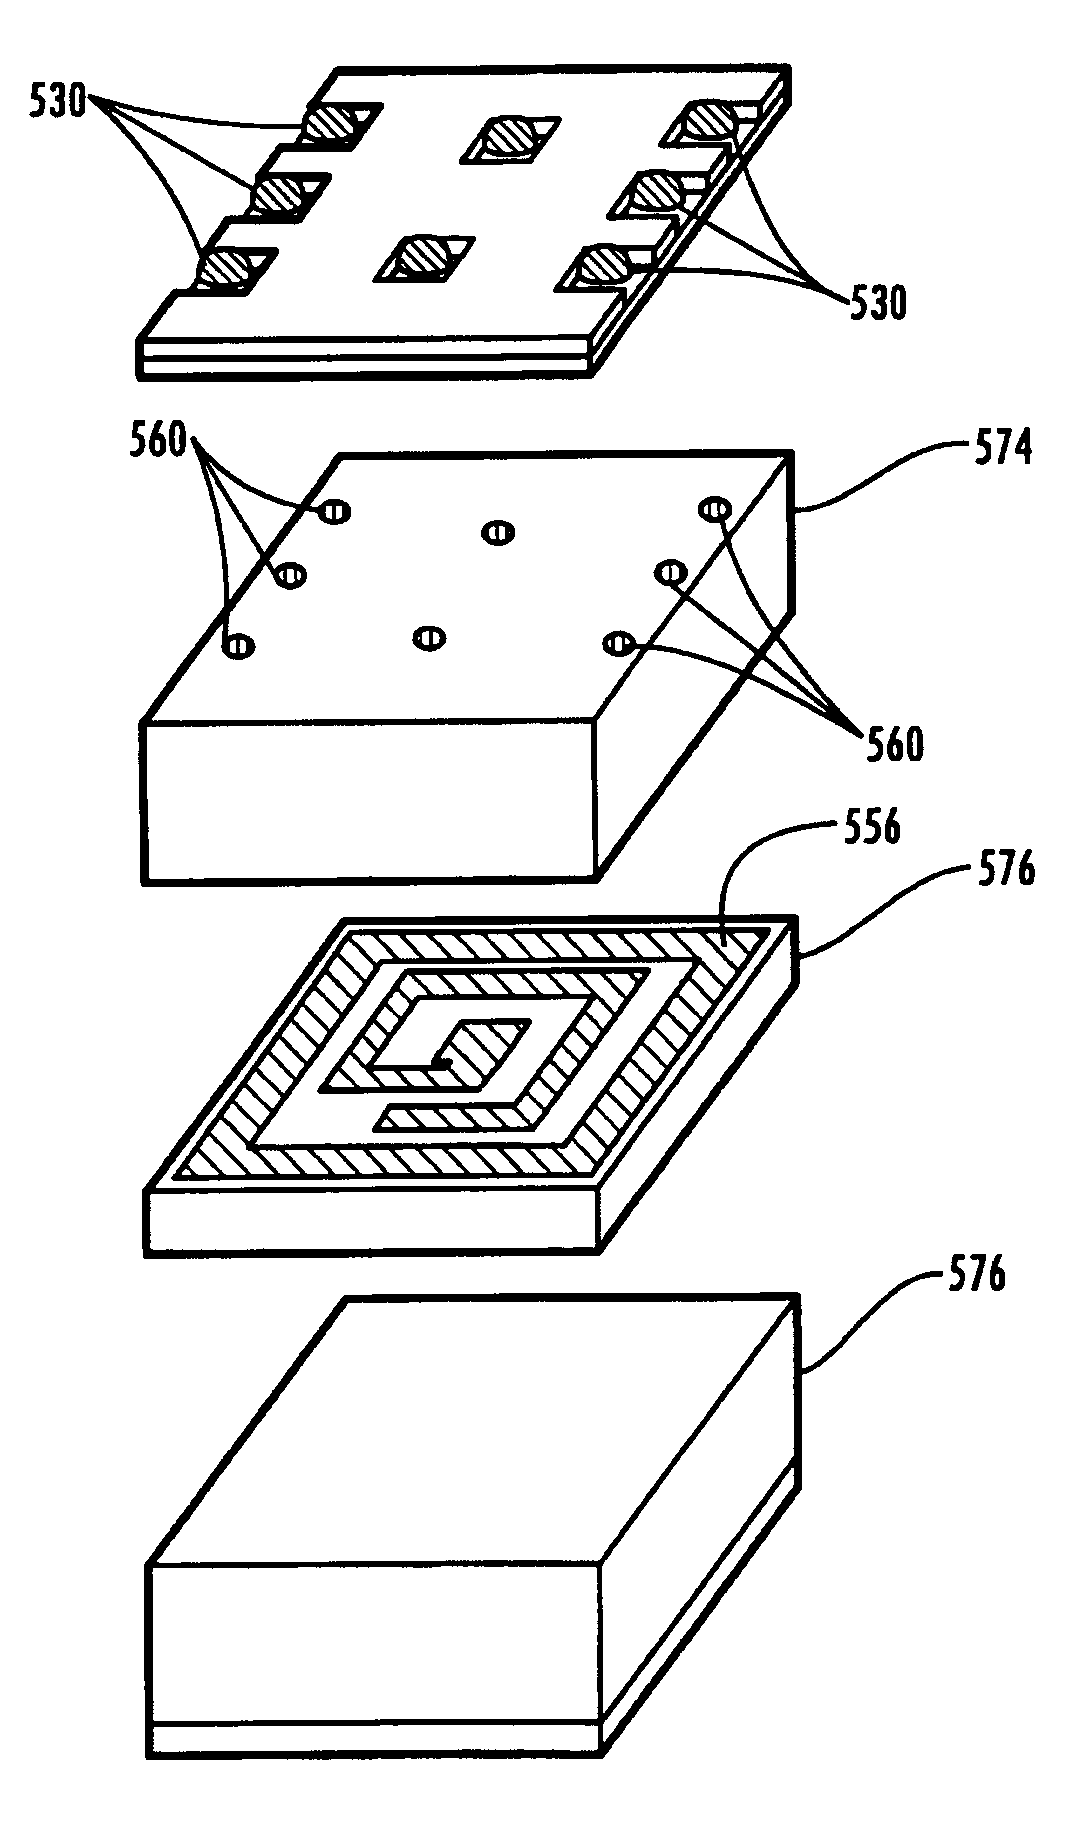 Stand-alone organic-based passive devices